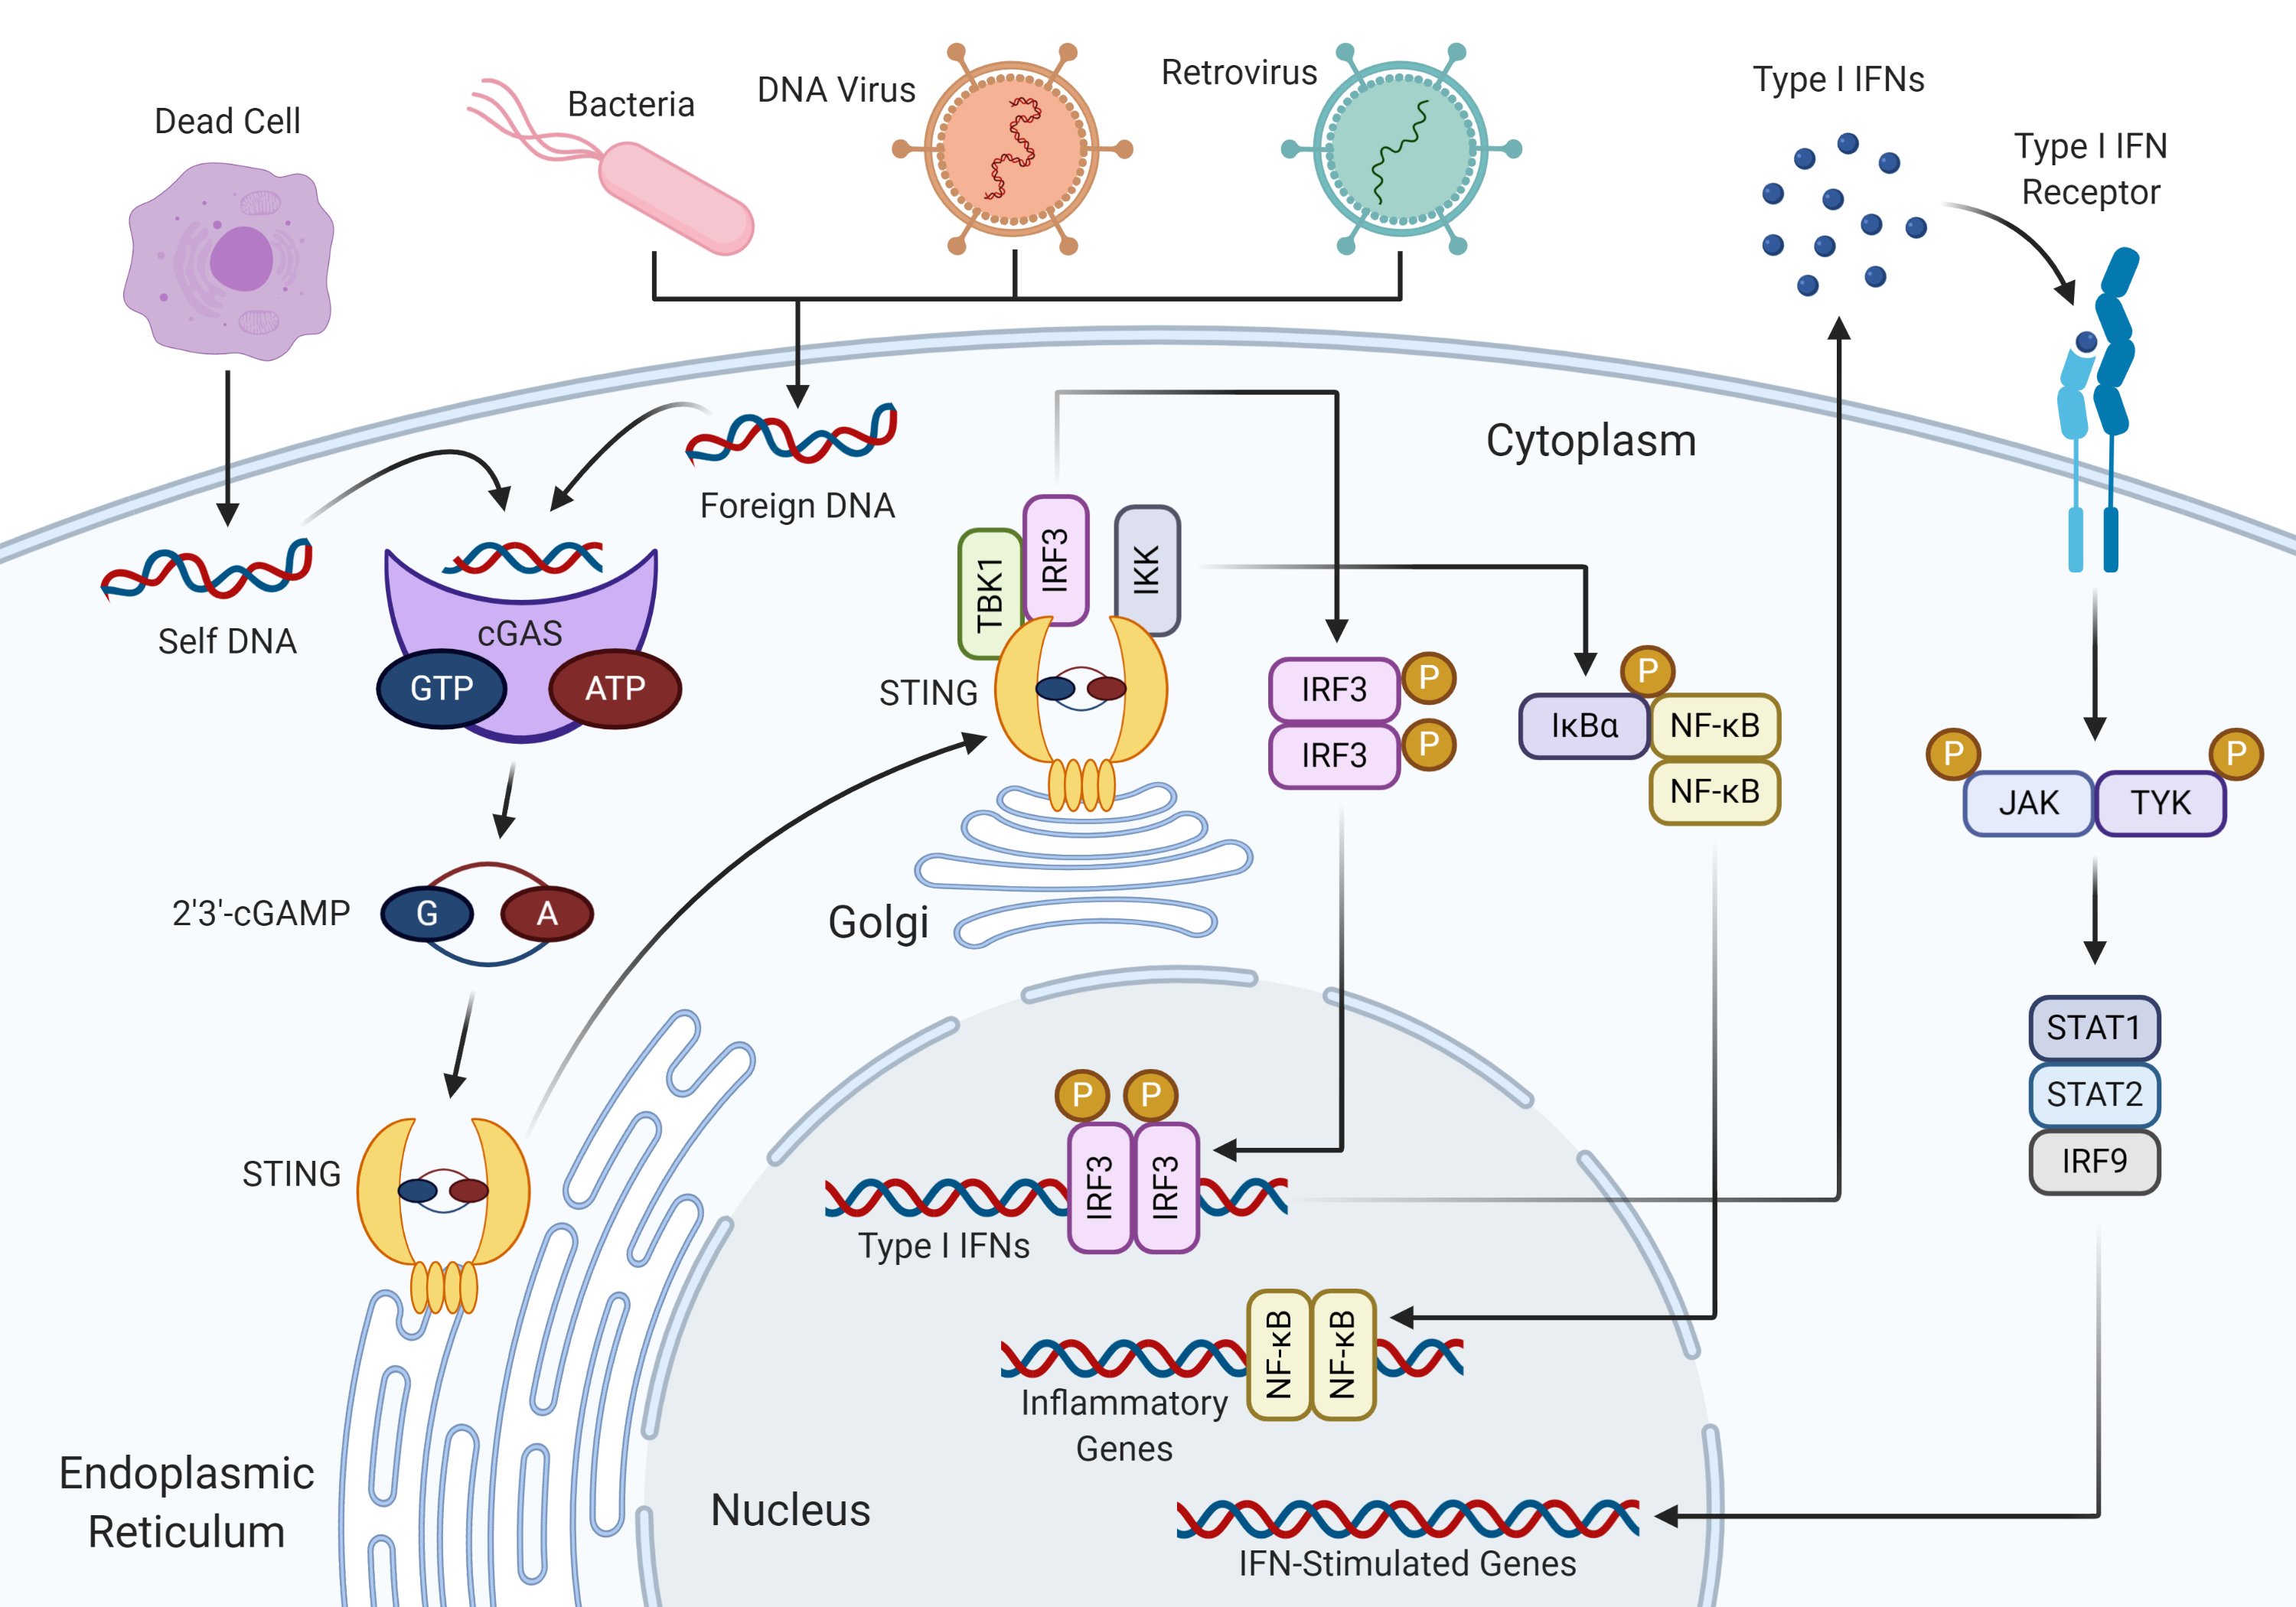 Diagram of DNA sensing and signaling by the cGAS-STING signaling pathway, leading to expression of type I interferons and inflammatory cytokines